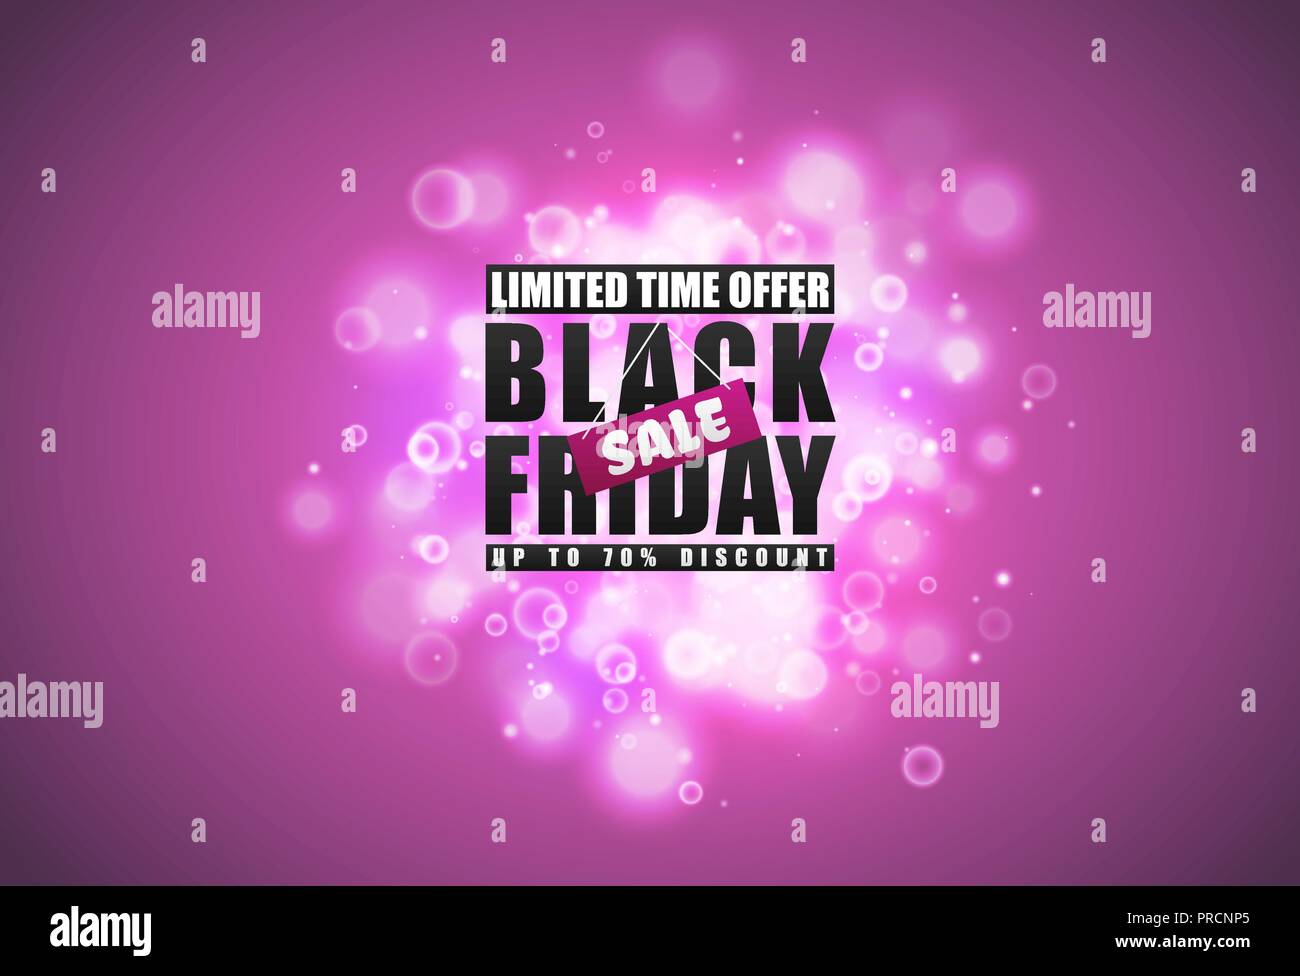 Black Friday sale banner. Black text with tag and glow sparks bokeh effect on pink background. Limited time offer. Up to 70 percent discount Stock Vector